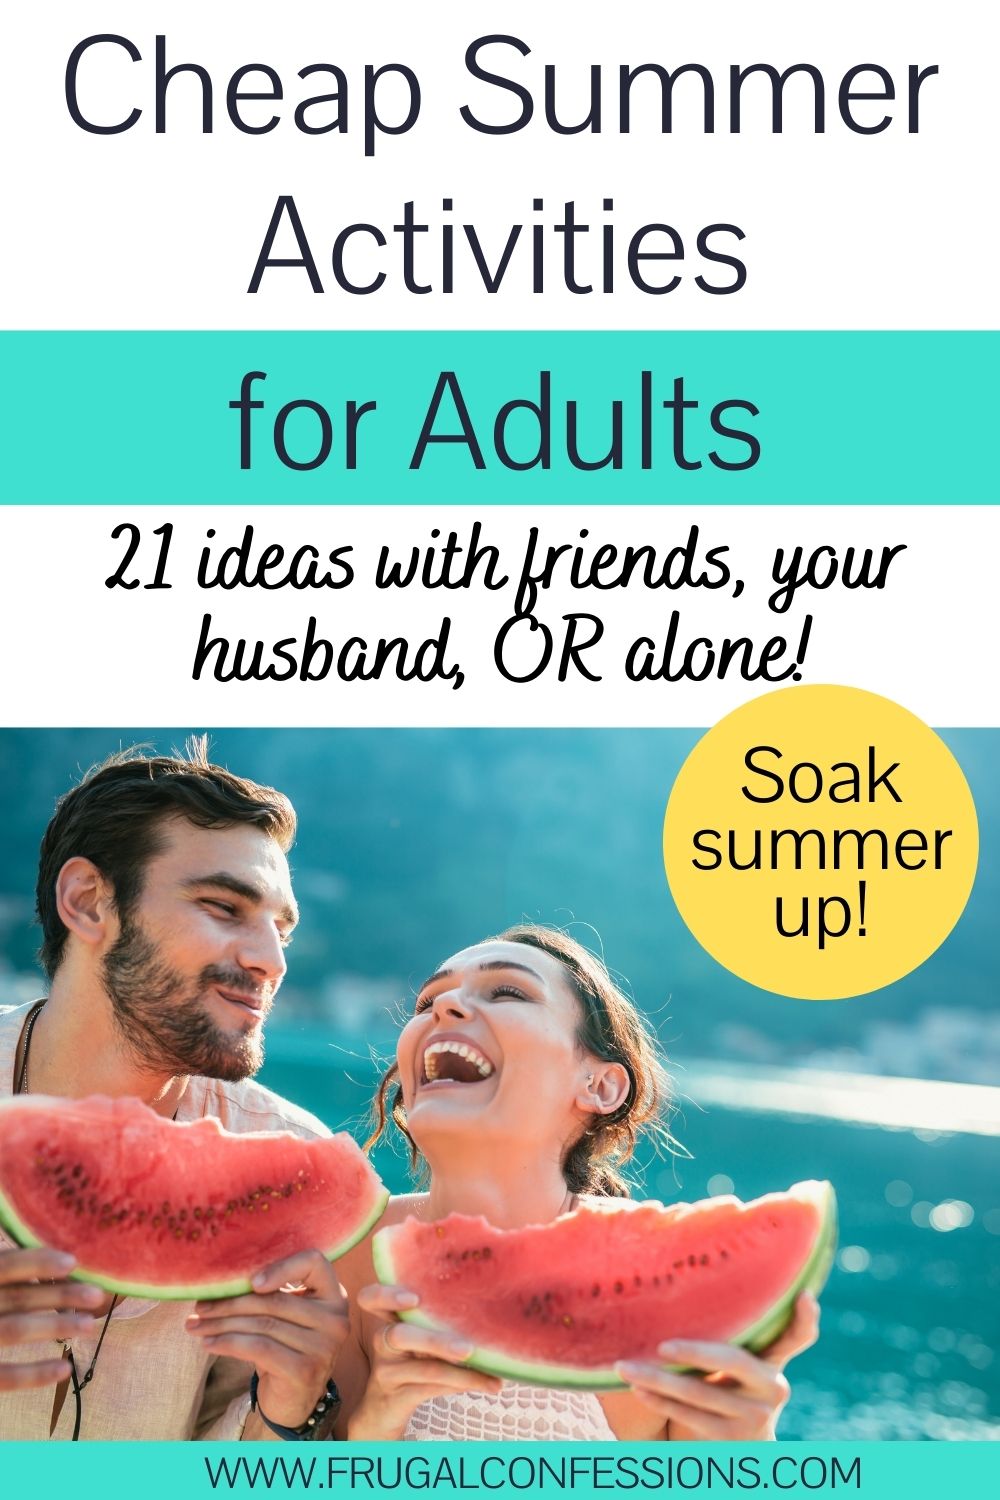 couple laughing, eating watermelon outside, text overlay "cheap summer activities for adults"